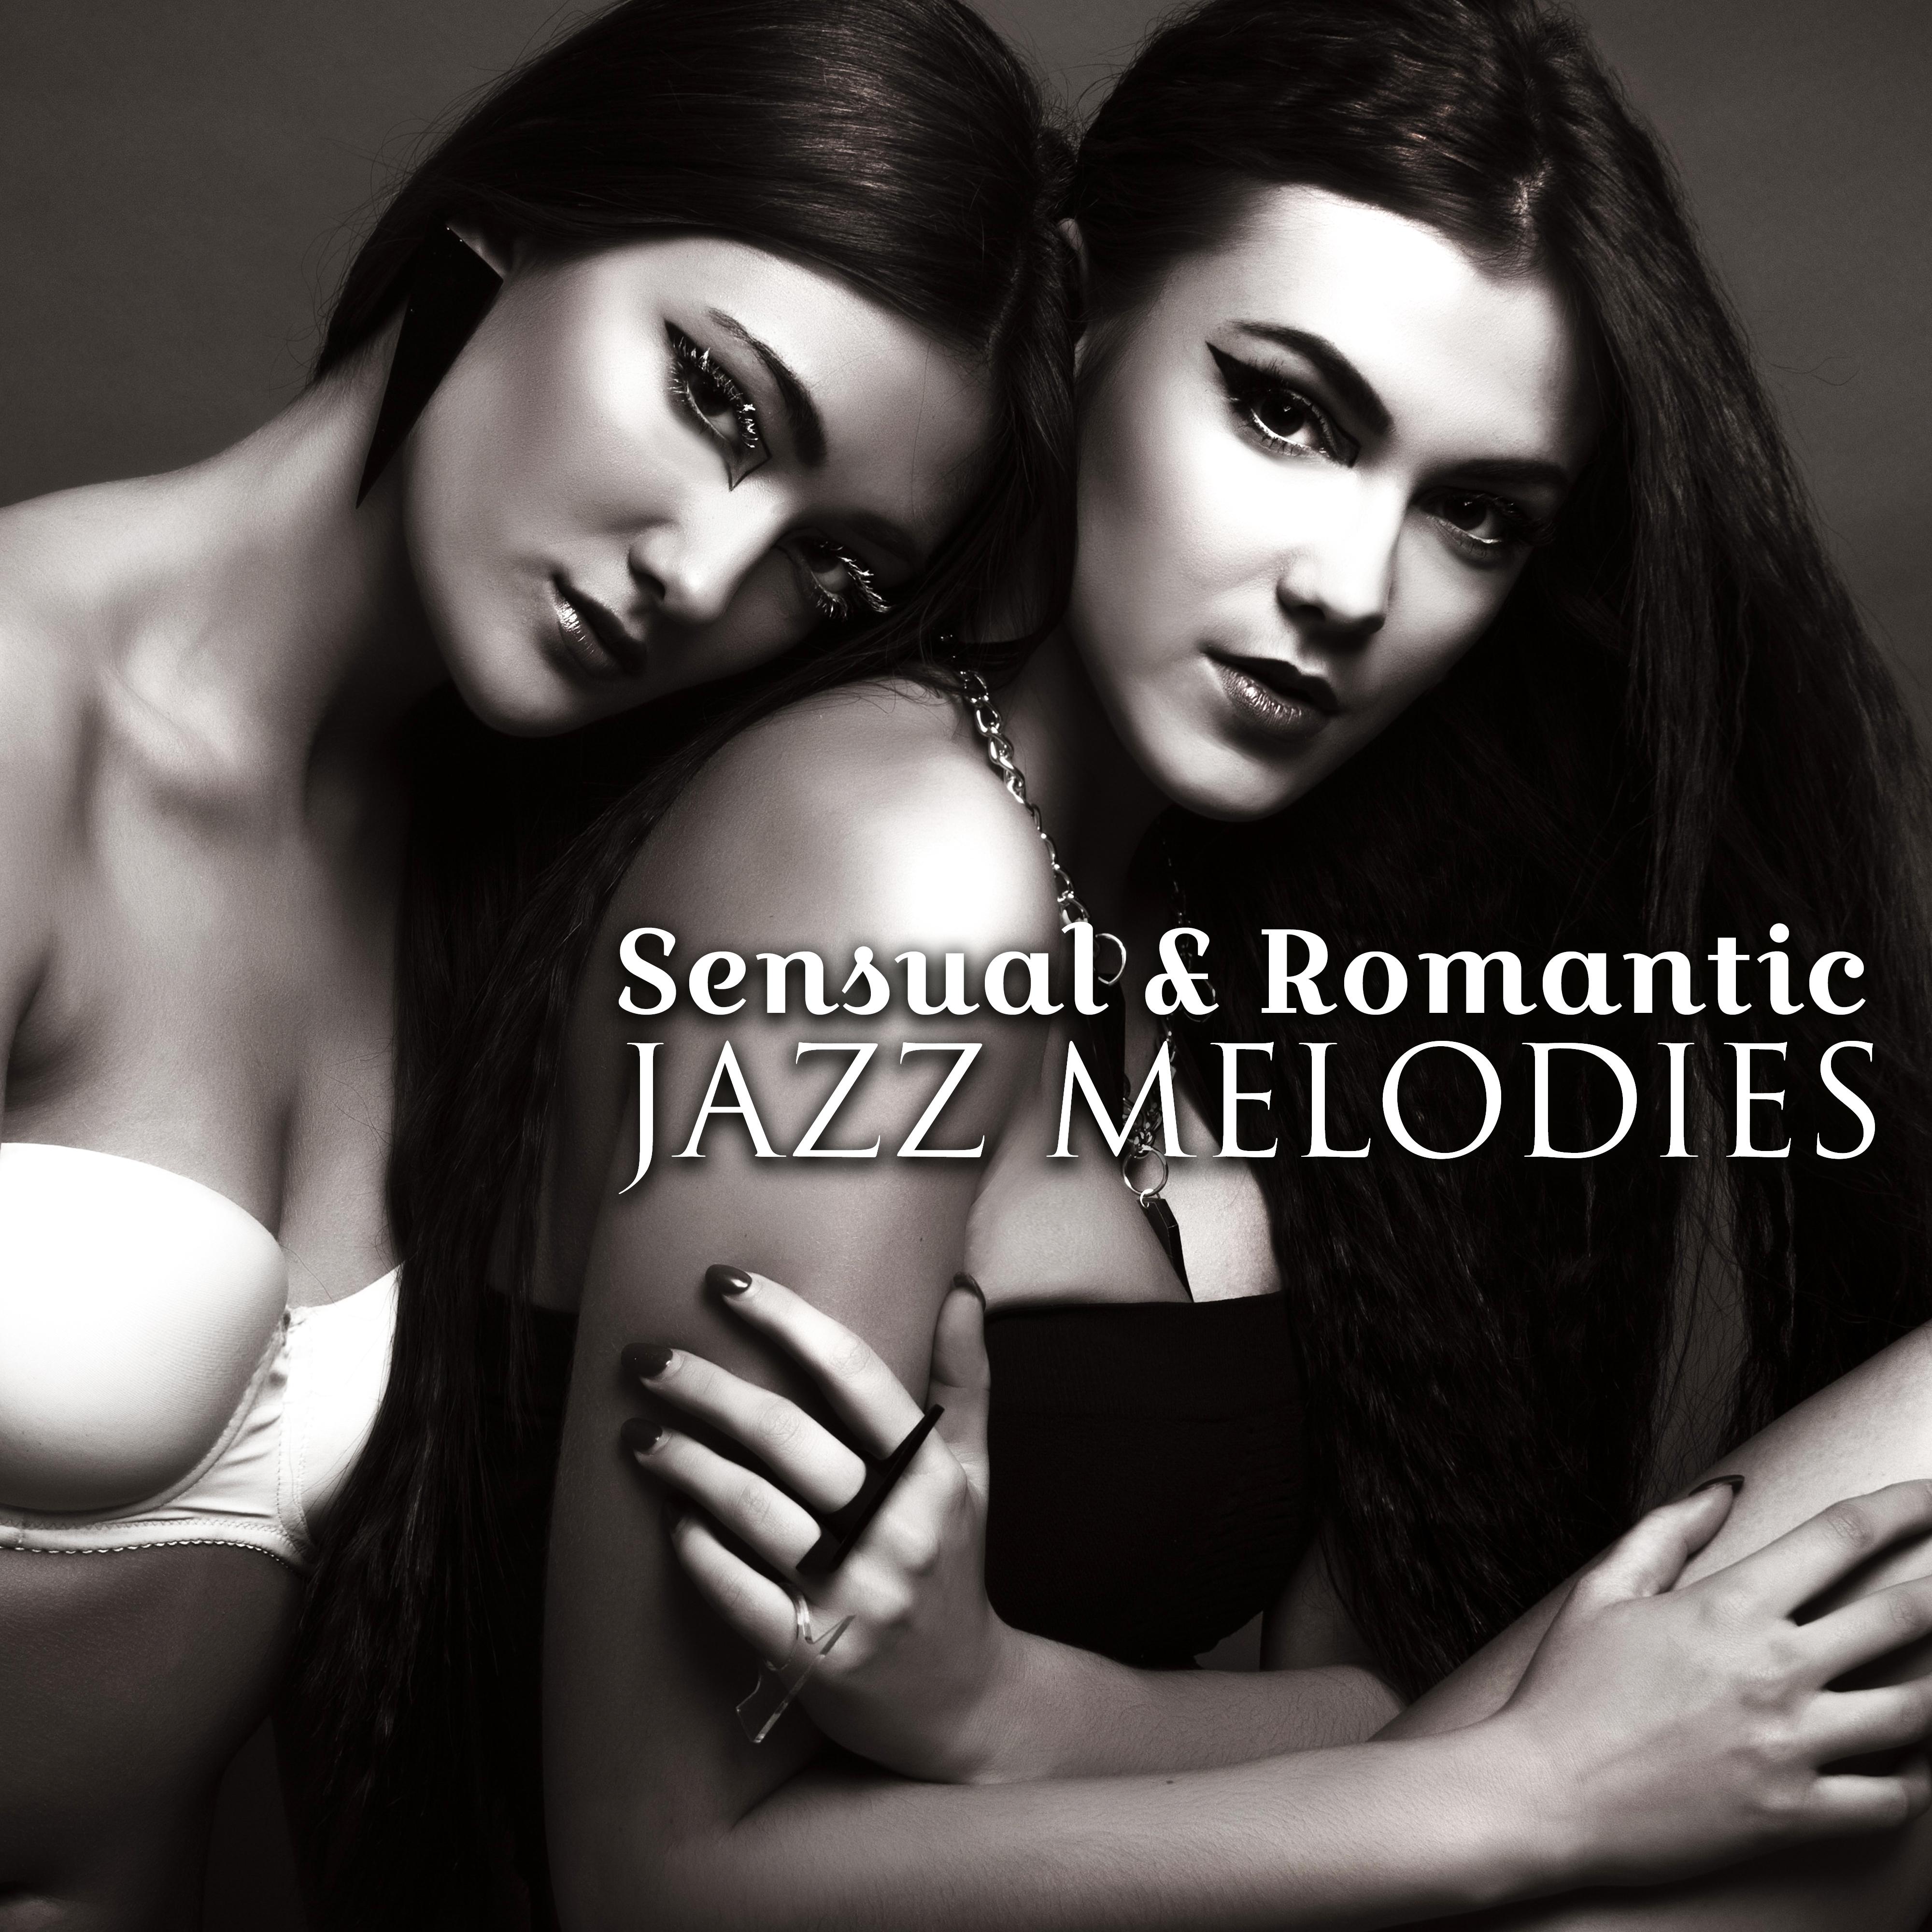 Sensual  Romantic Jazz Melodies  Jazz Melodies, Romantic Night, Background Music for Lovers, Moonlight Jazz